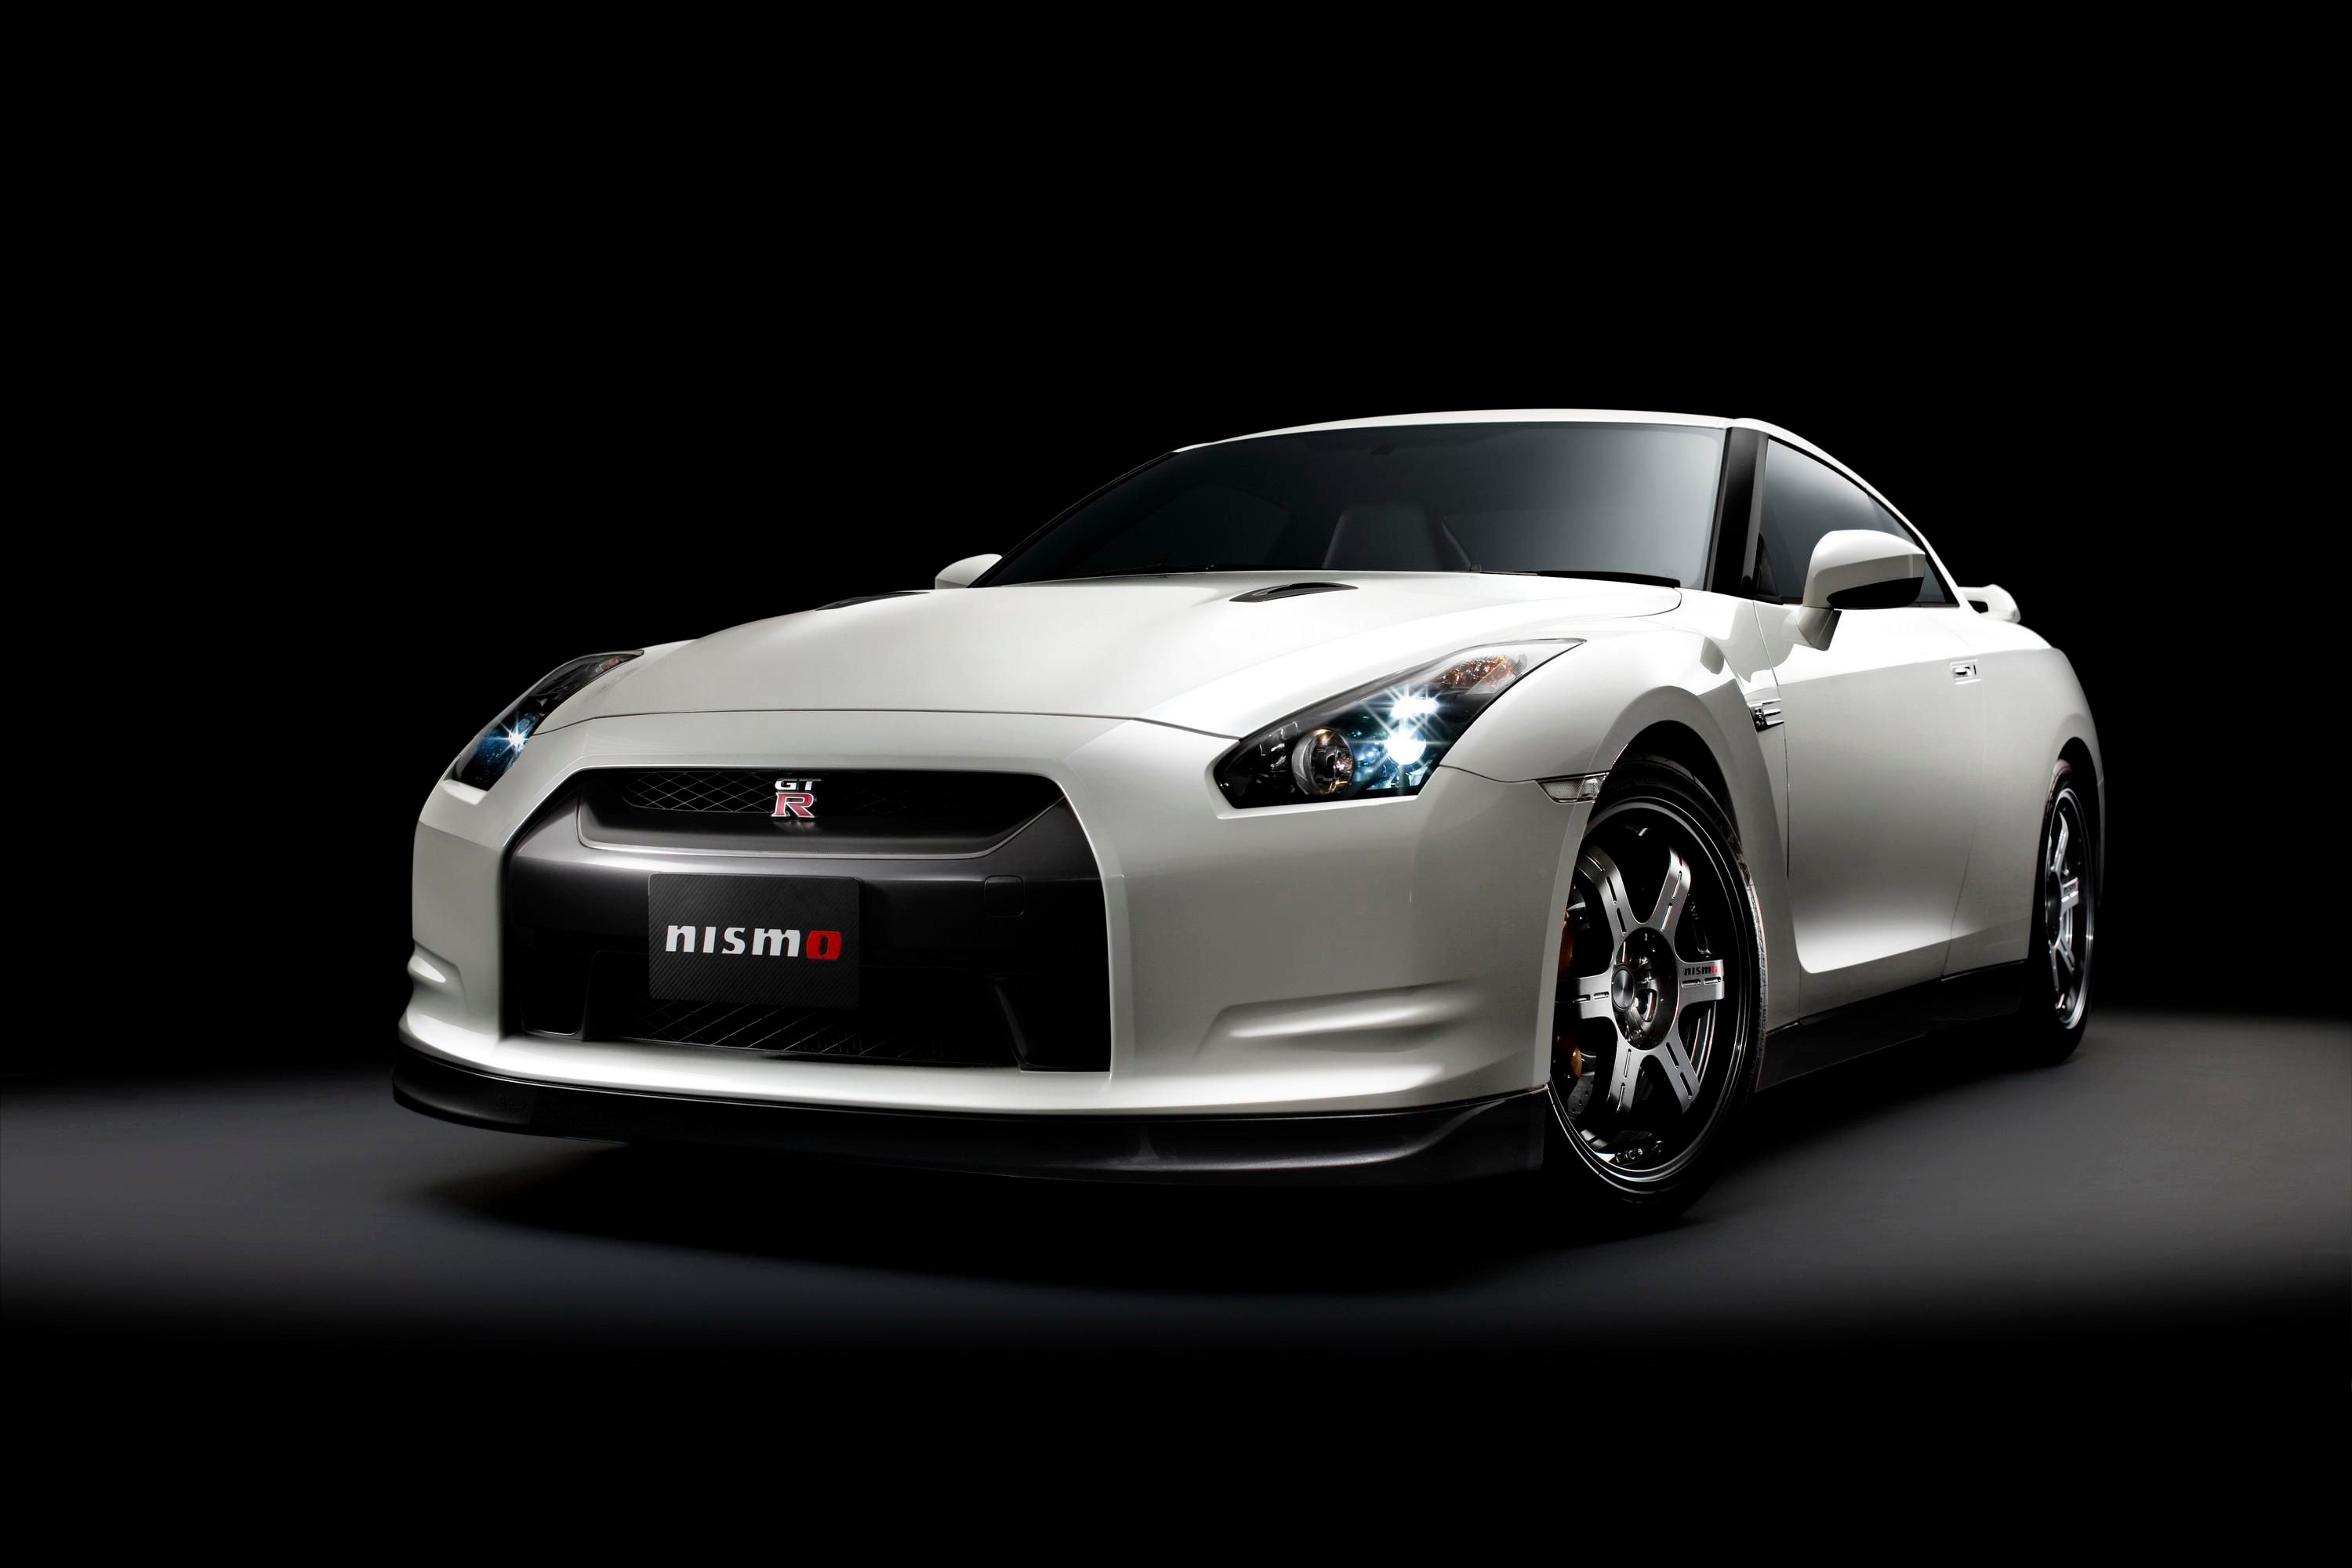 2009 Nissan GT-R with Nismo 